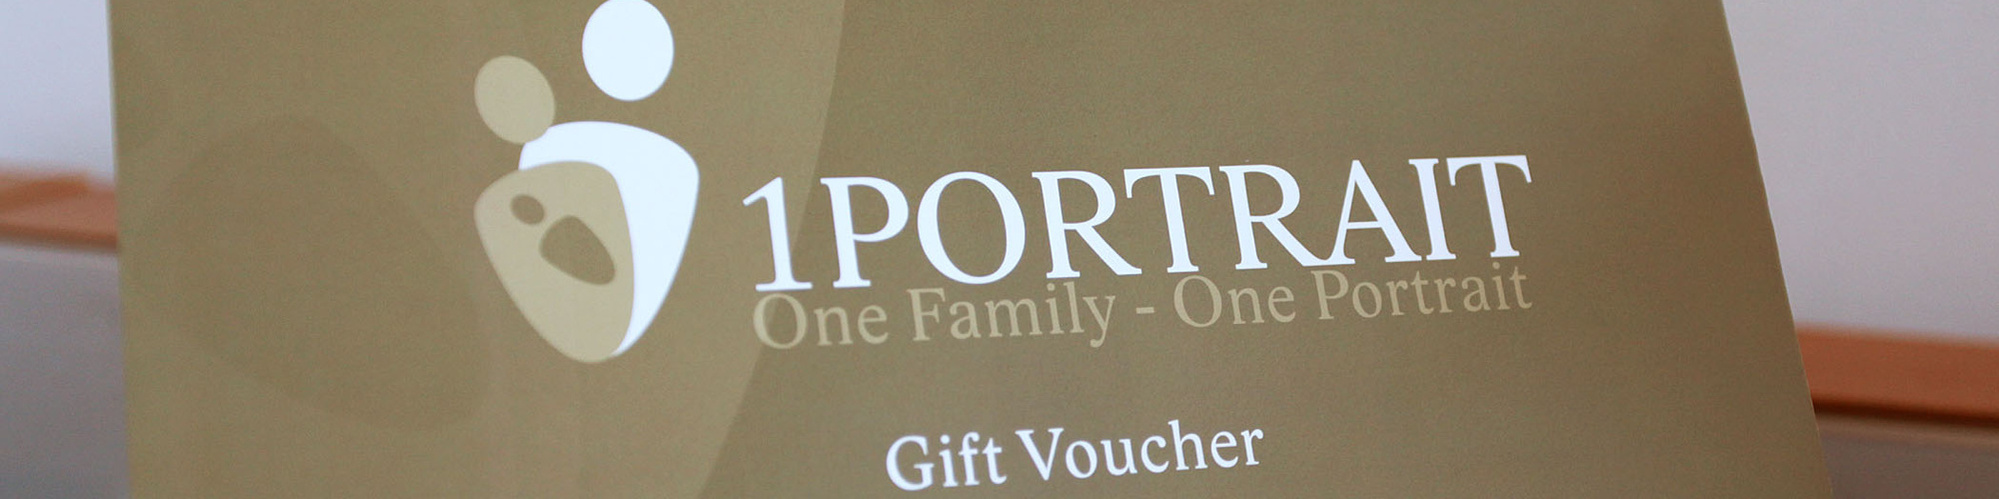 Family Portrait Photography Studio Gift Voucher - Small Benefit Scheme Tax Free Gift Cards for Employees